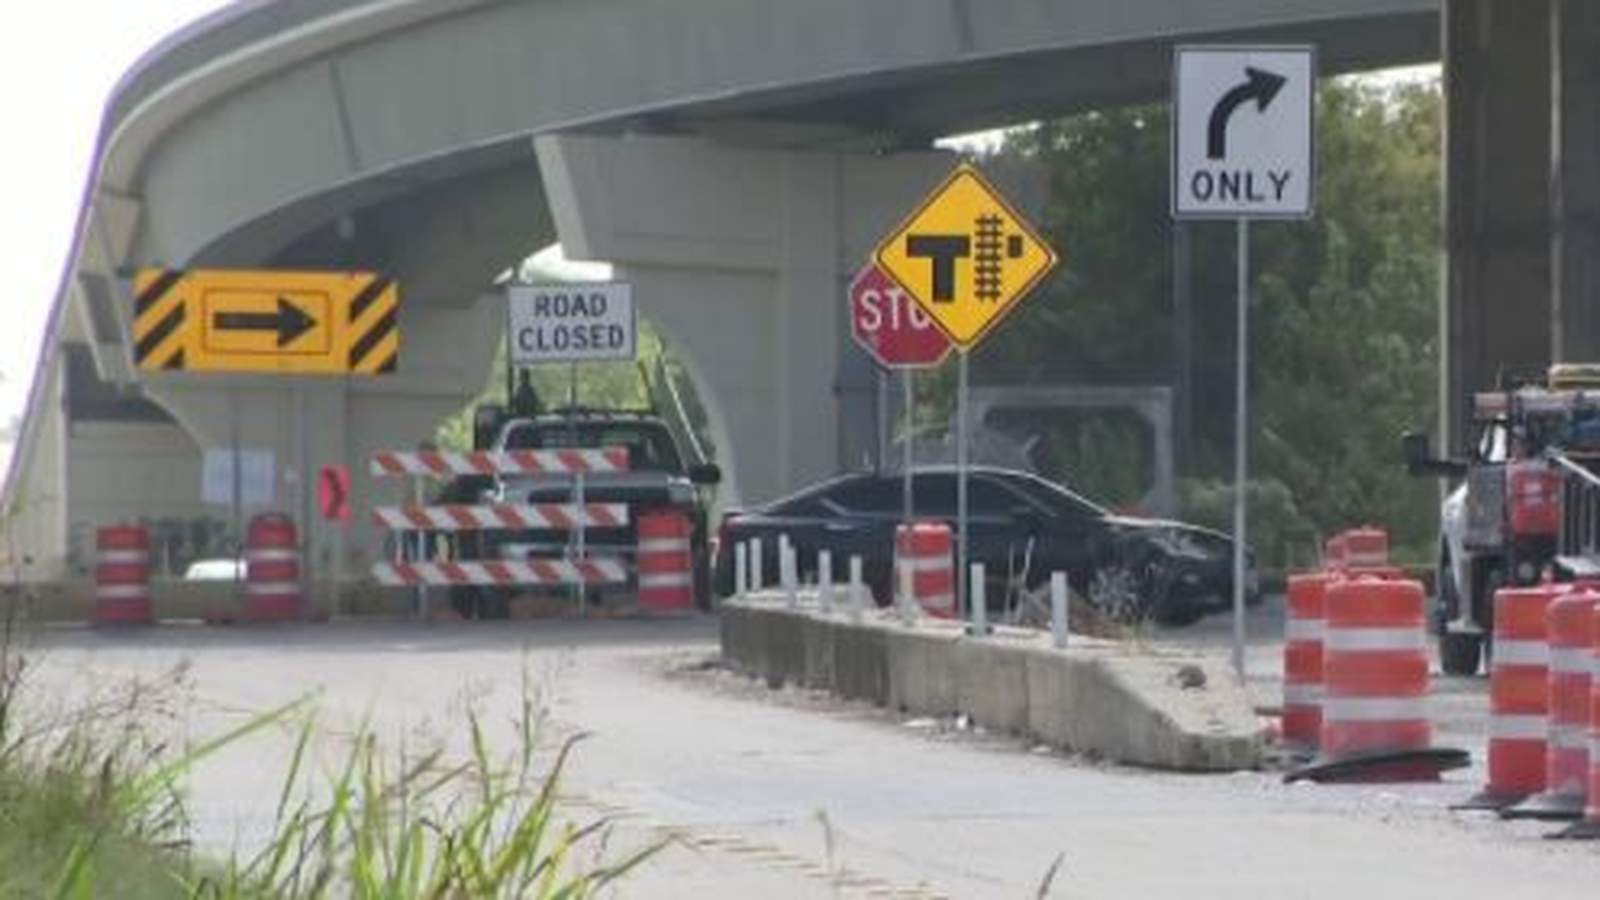 Update on Highway 6 construction project: Bridge near Cy-Fair over Northwest Freeway